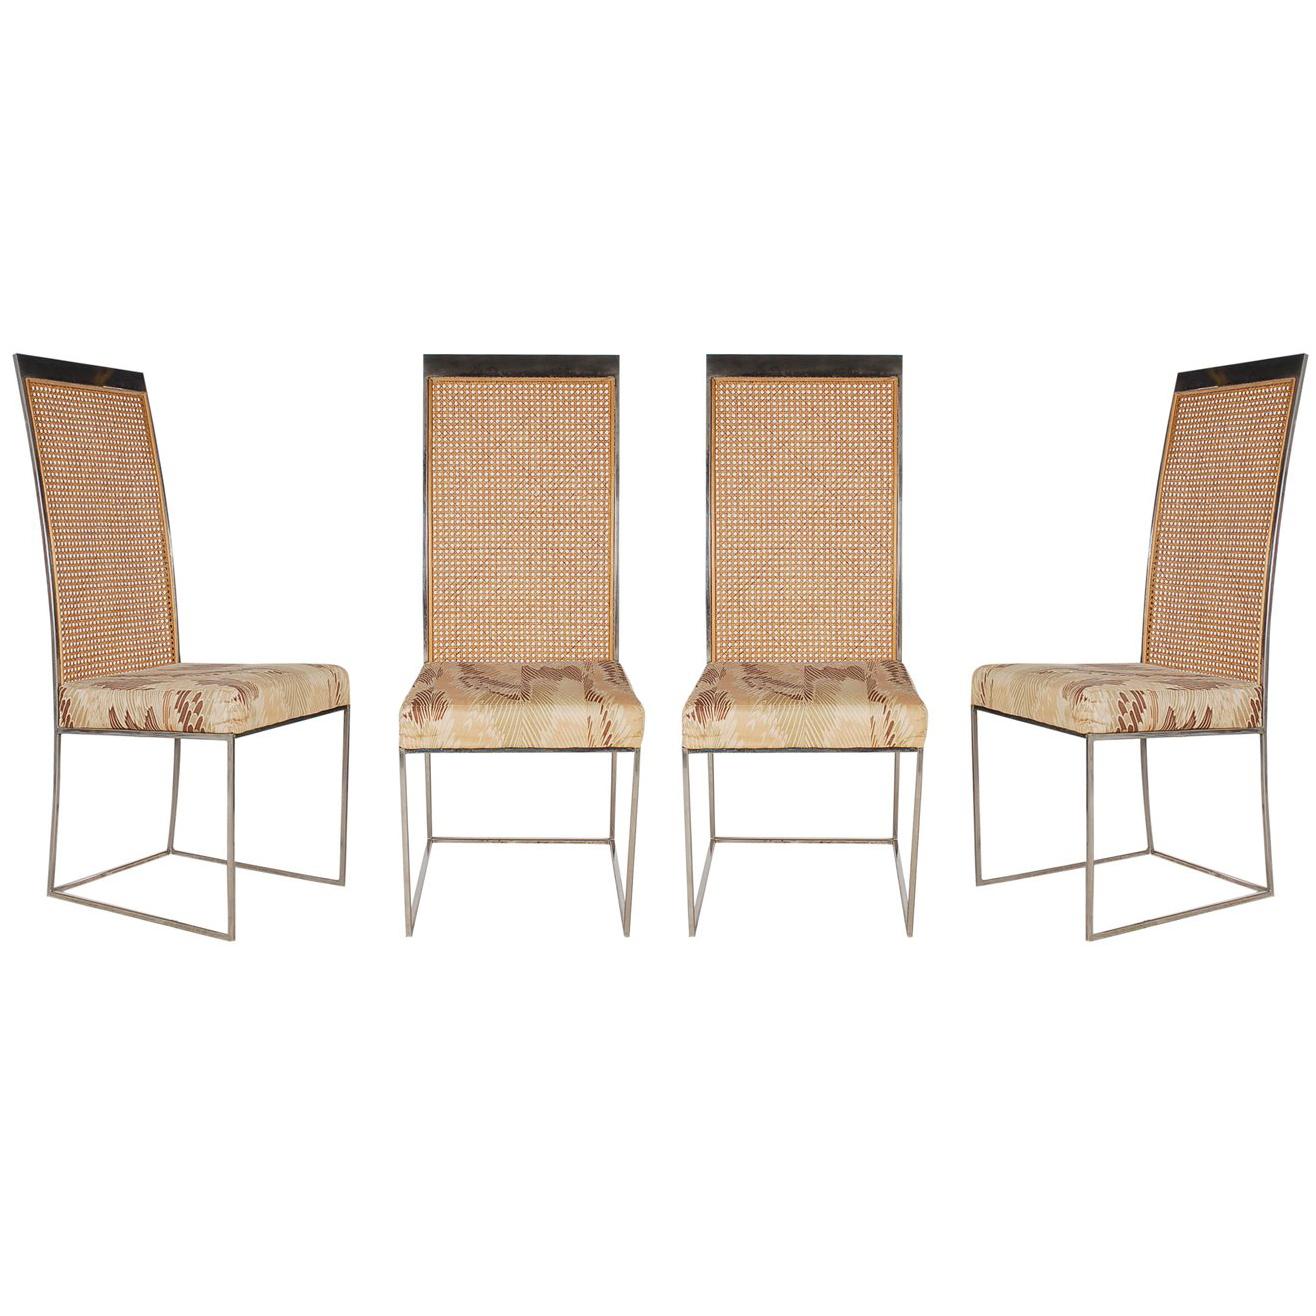 Mid-Century Modern Chrome and Cane High Back Dining Chairs by Milo Baughman